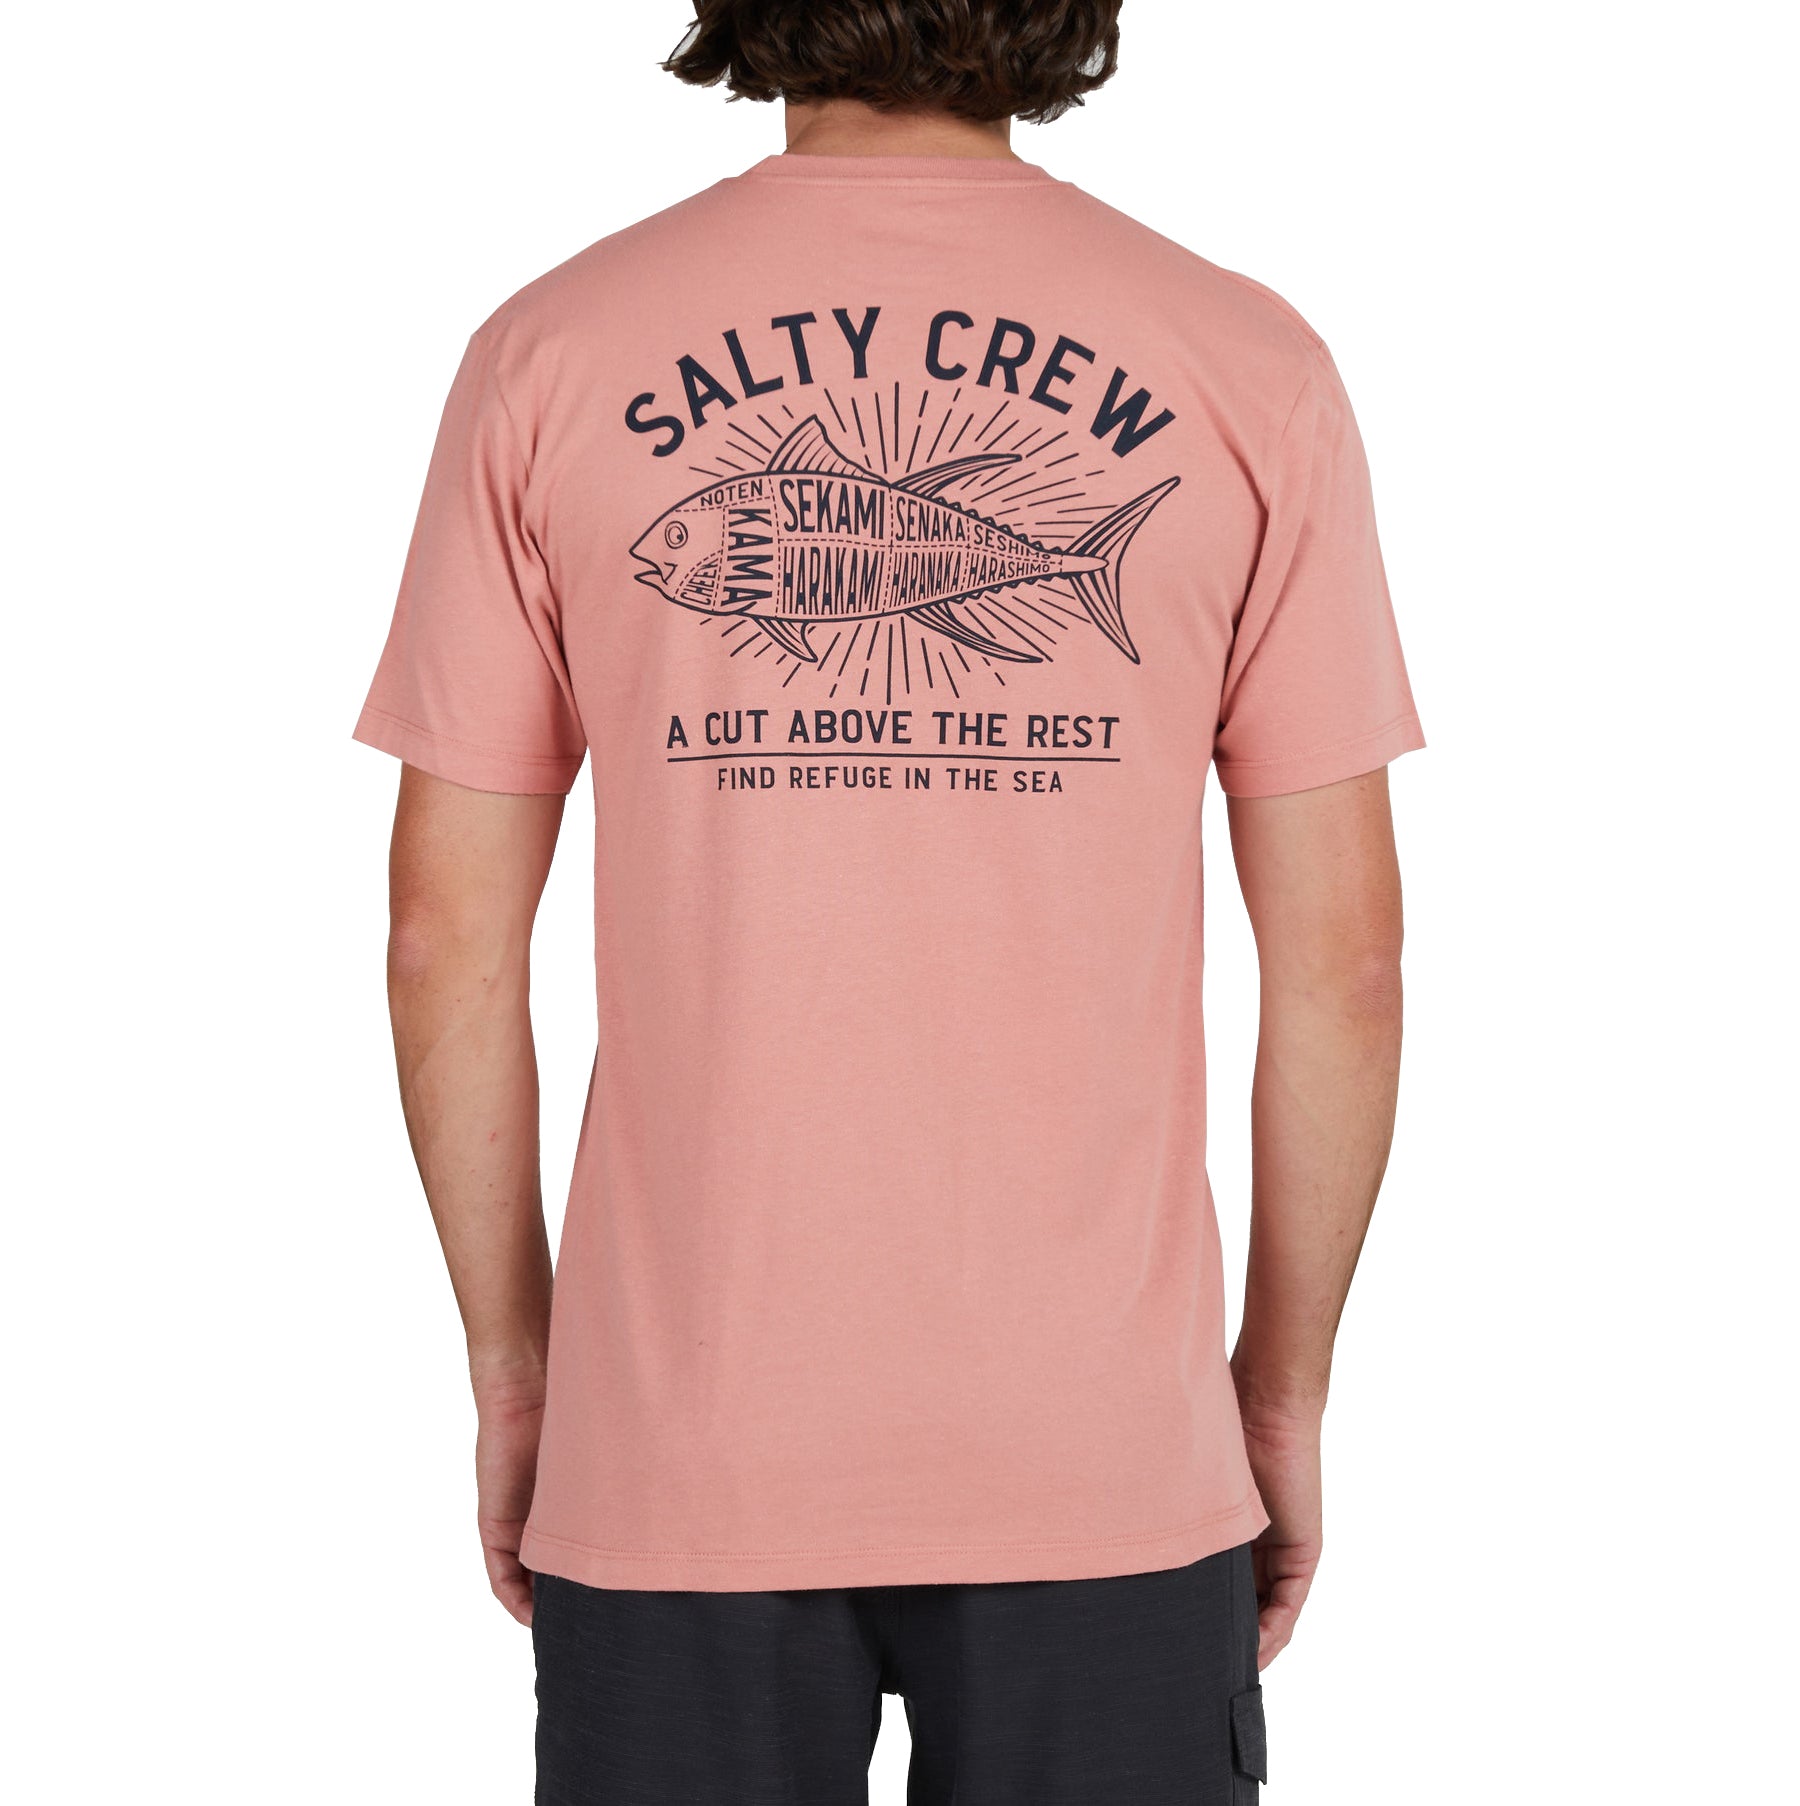 Salty Crew Cut Above SS Tee Coral L